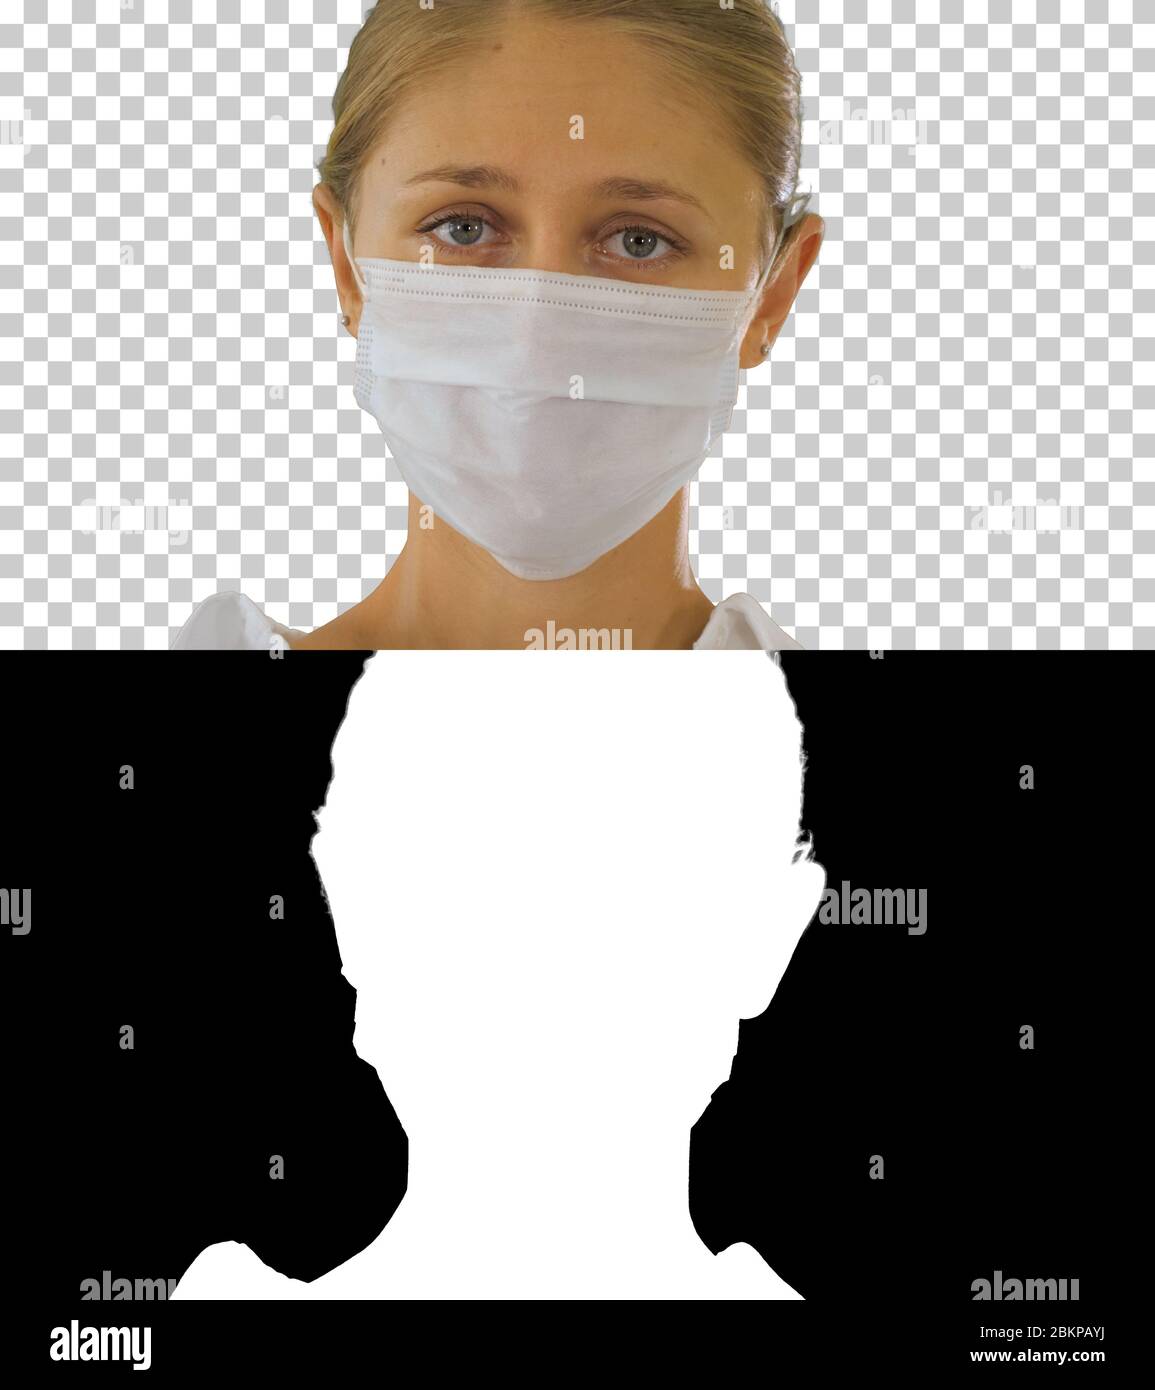 Business woman in a protective medical mask, Alpha Channel Stock Photo